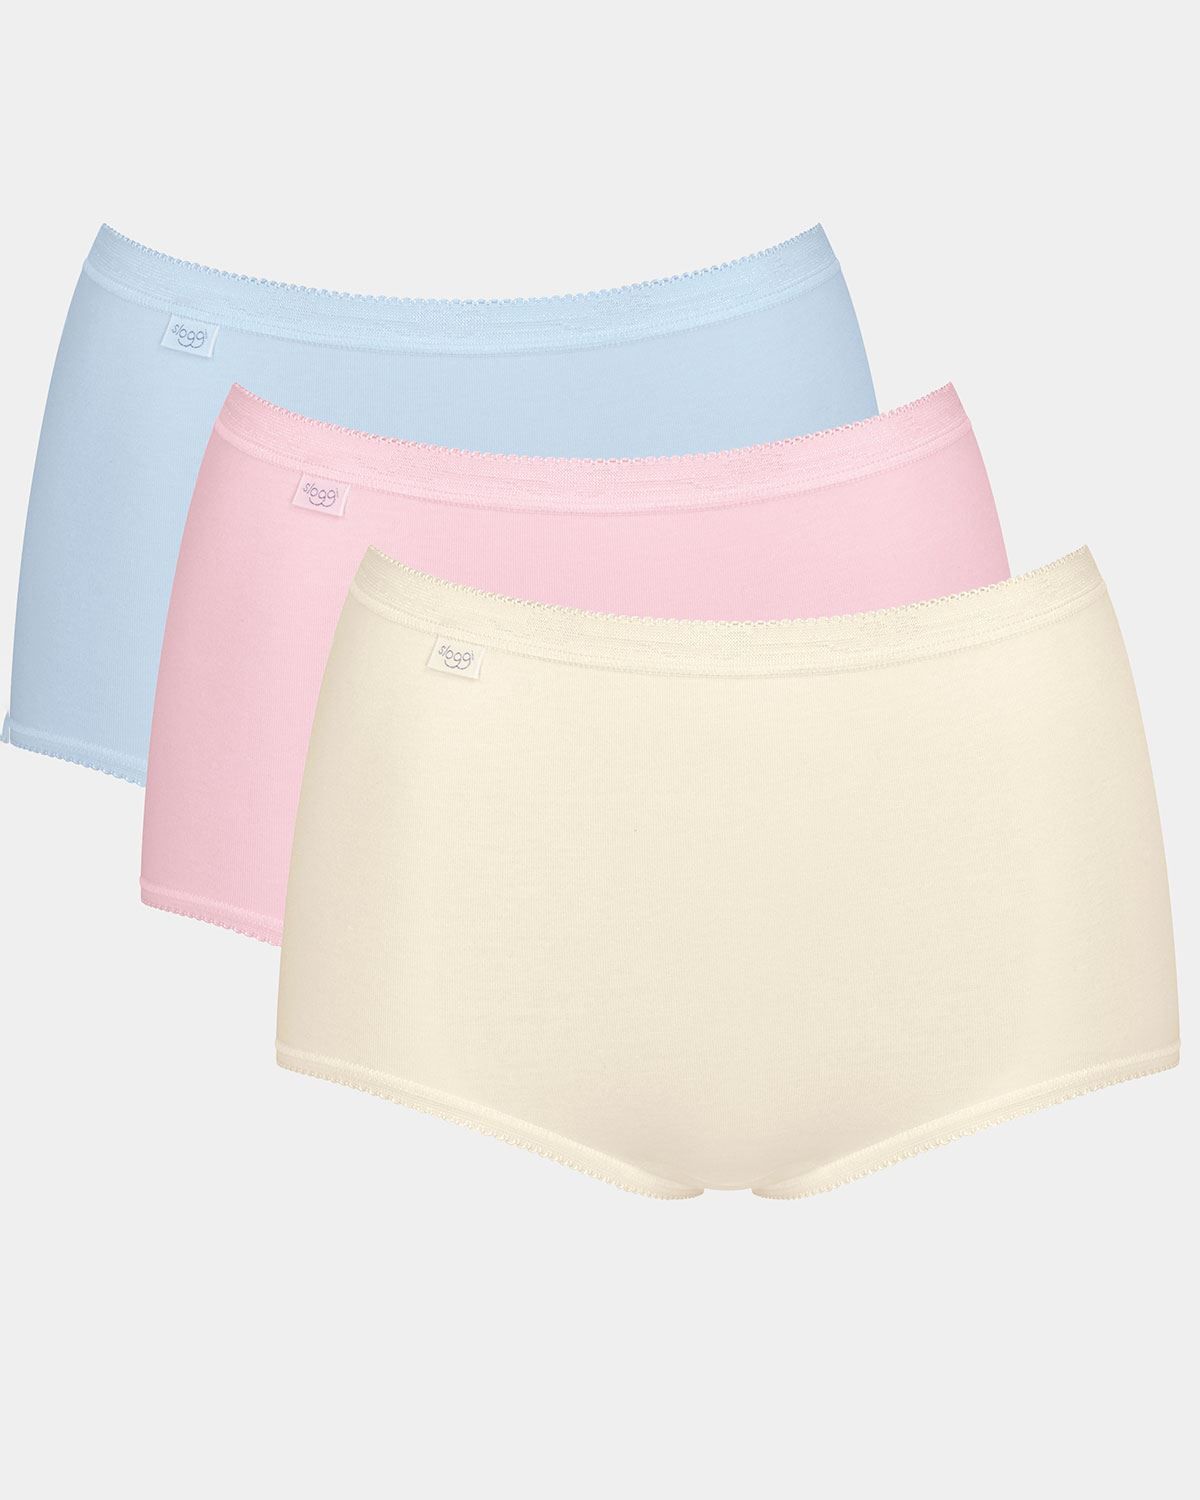 Sloggi 3 Colour Maxi Briefs From Country Collection.